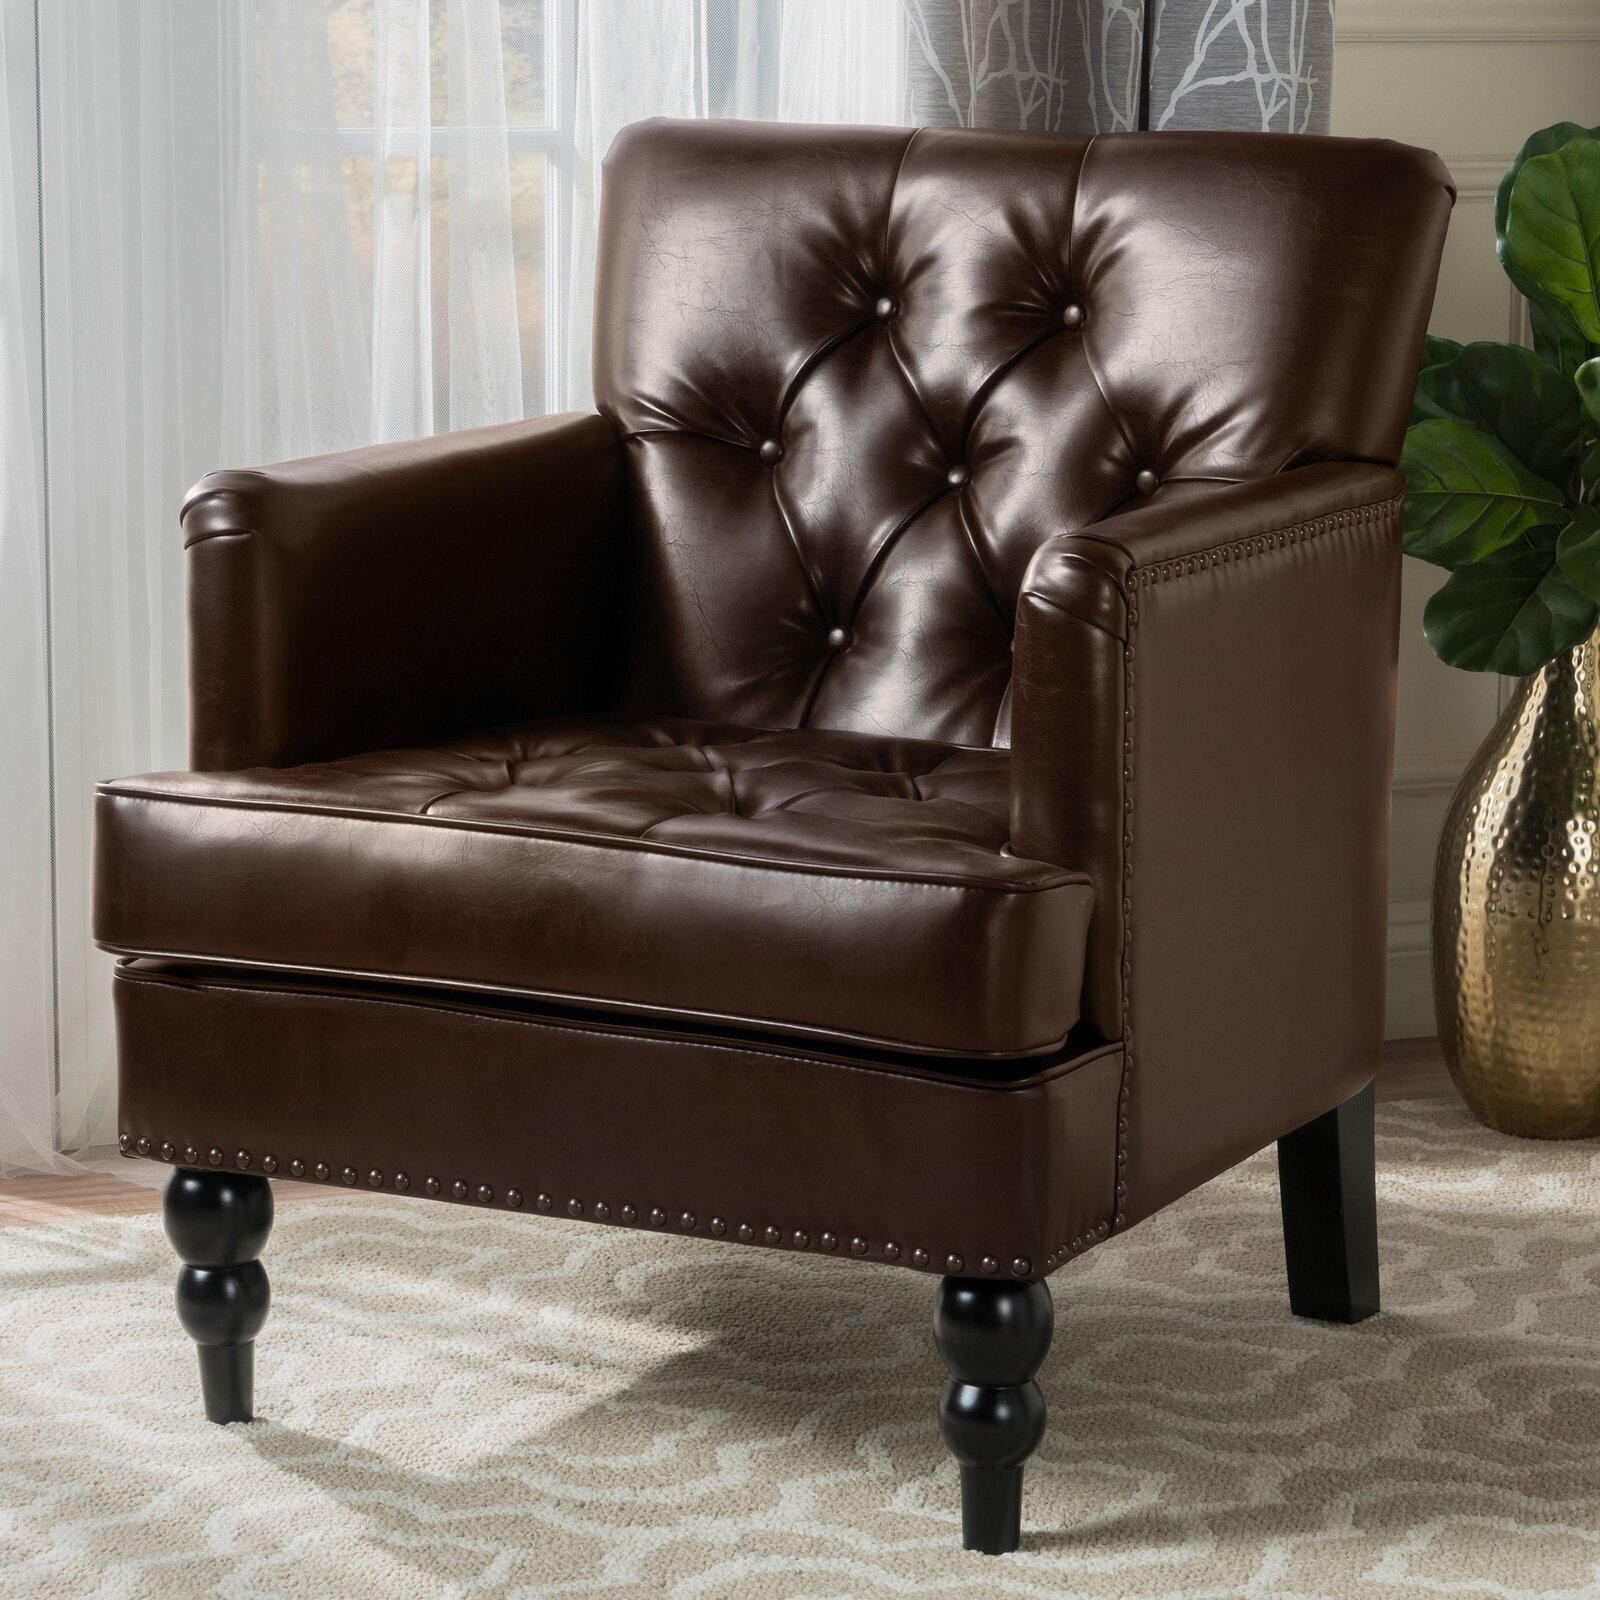 27 5” Wide Tufted Faux Leather Armchair